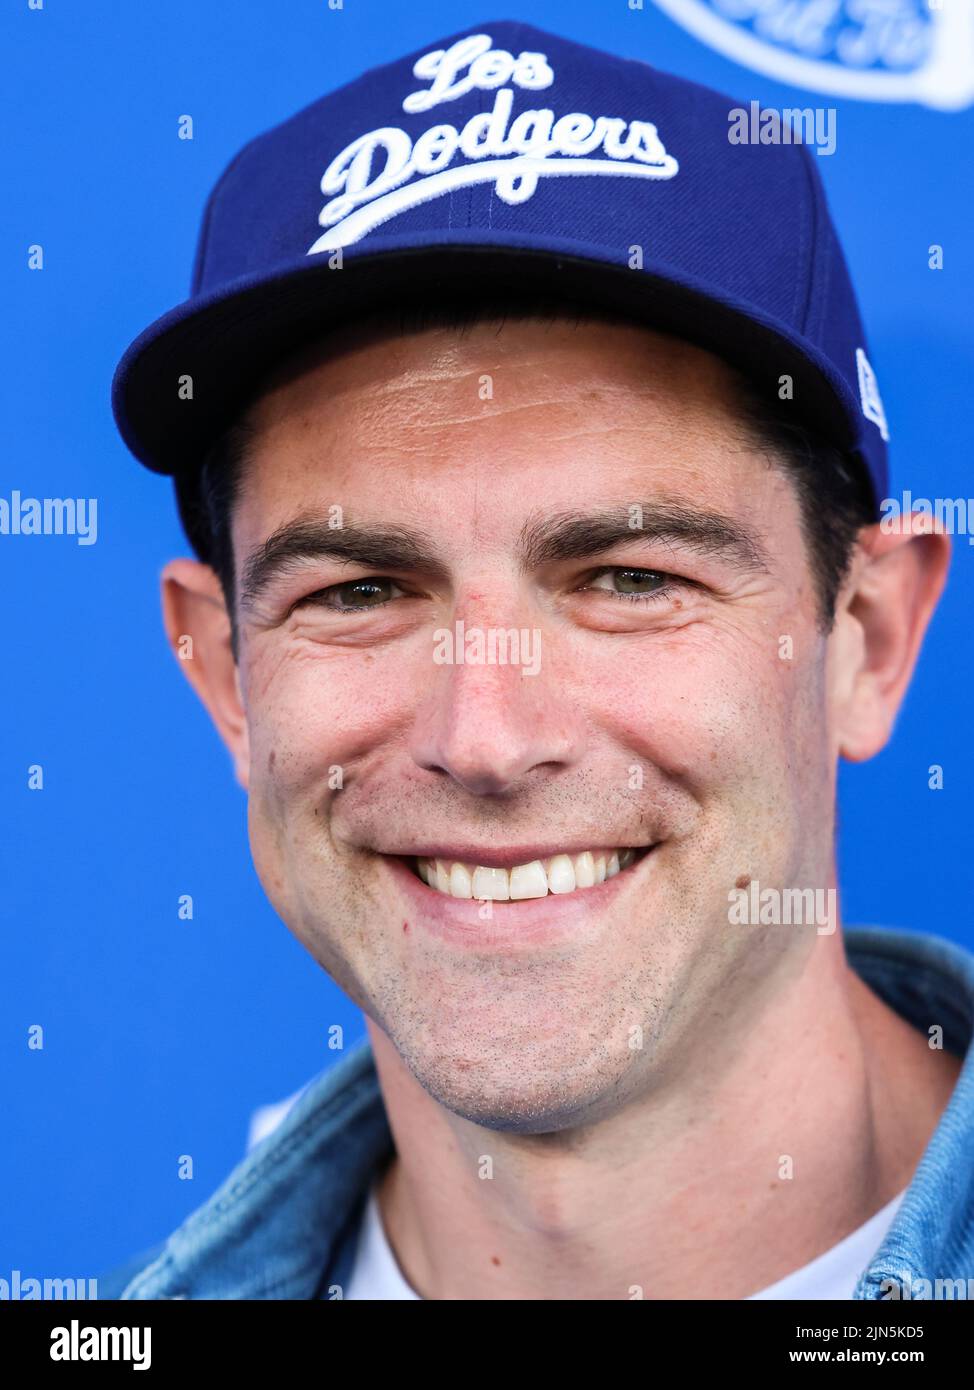 Los Angeles, United States. 08th Aug, 2022. ELYSIAN PARK, LOS ANGELES, CALIFORNIA, USA - AUGUST 08: American actor Max Greenfield arrives at Kershaw's Challenge Ping Pong 4 Purpose 2022 held at Dodger Stadium on August 8, 2022 in Elysian Park, Los Angeles, California, United States. (Photo by Xavier Collin/Image Press Agency) Credit: Image Press Agency/Alamy Live News Stock Photo